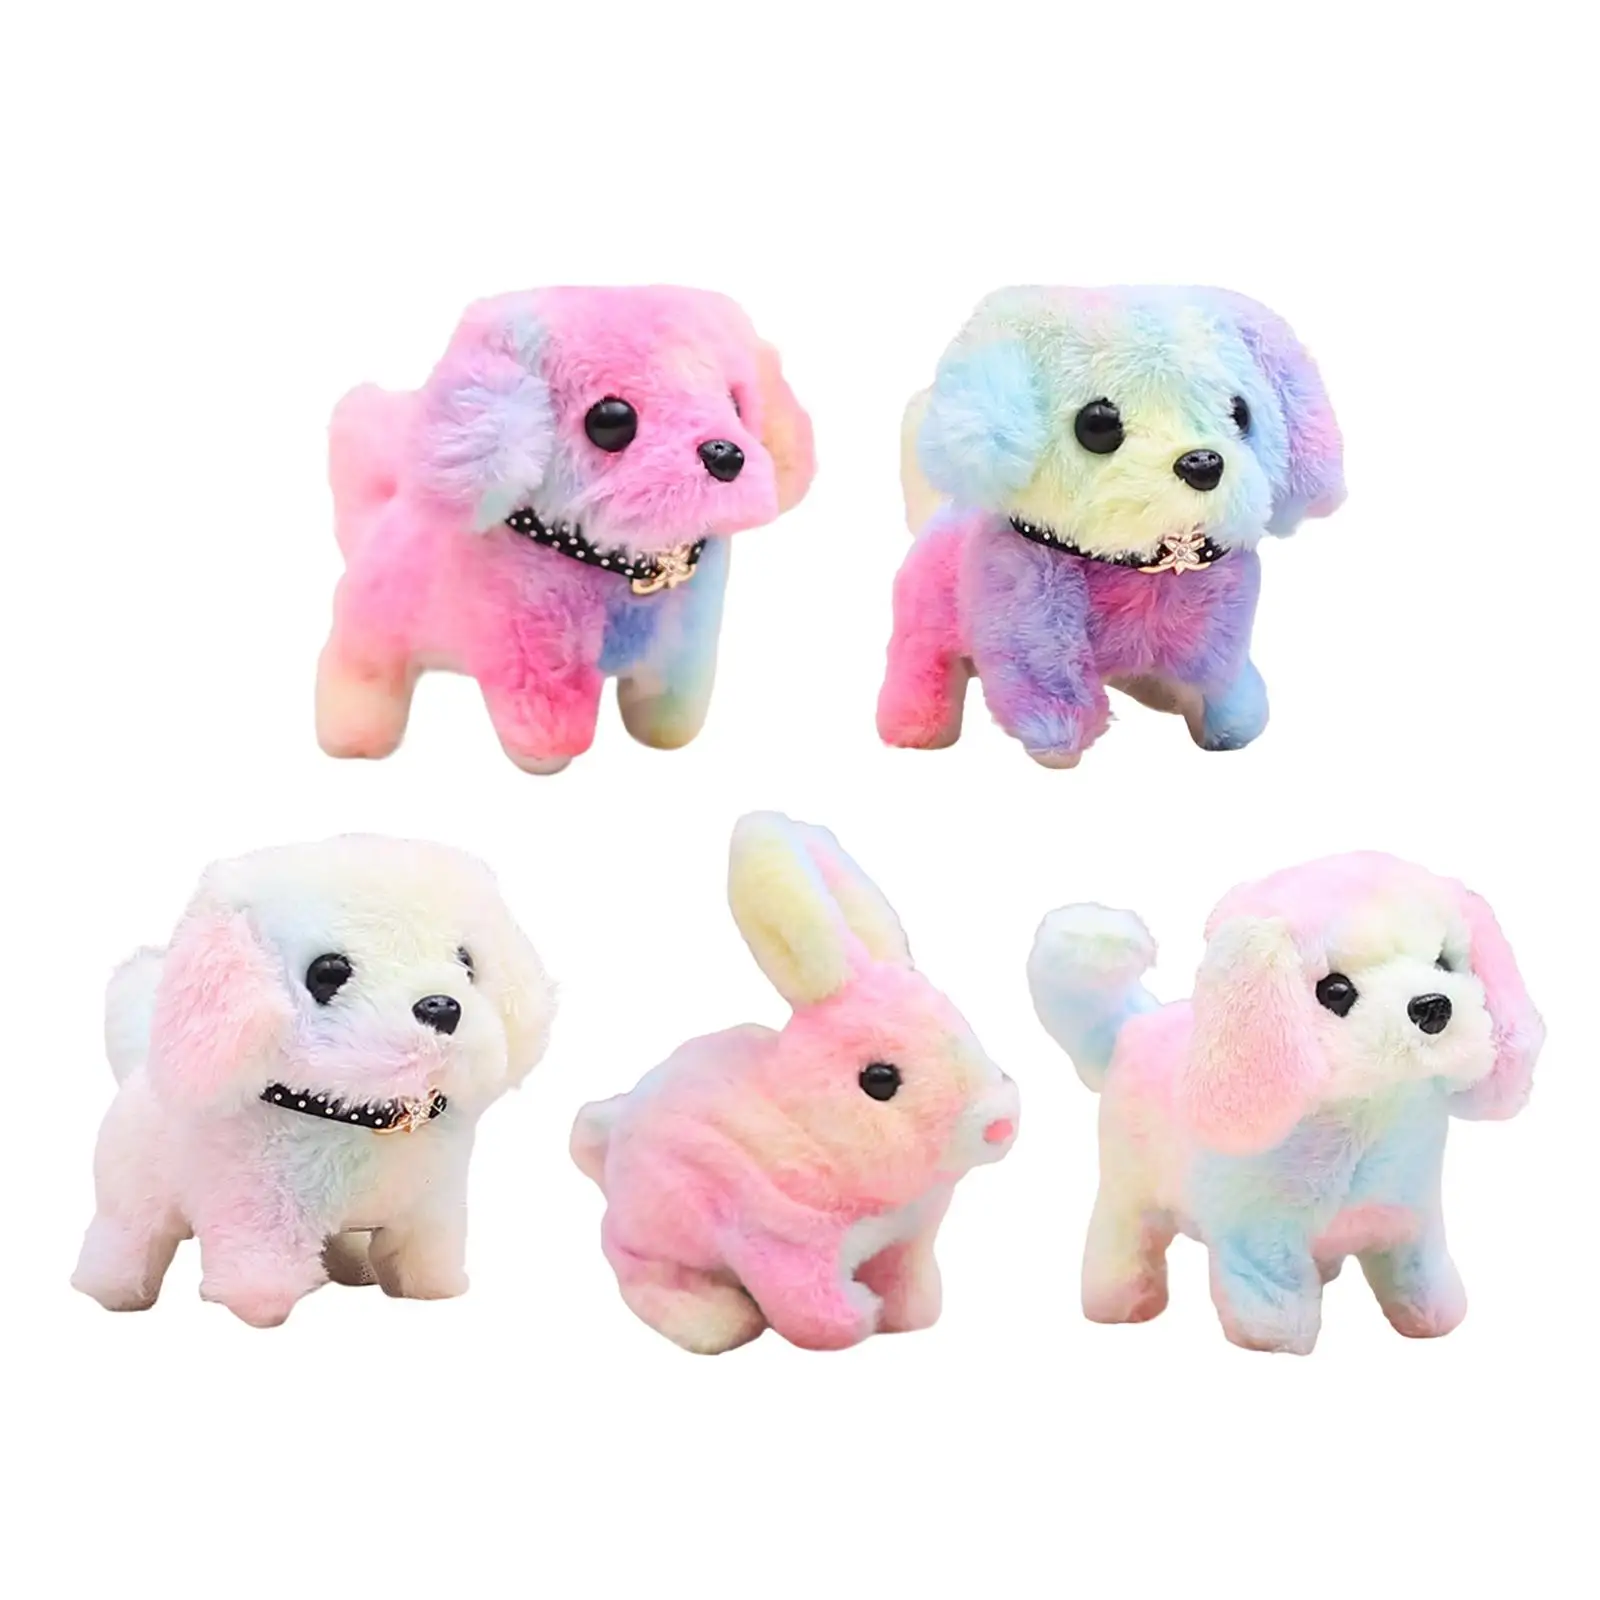 Electronic Pet Figures Adorable Novelty Stuffed Animals Plush Toy Doll for New Year Gifts Xmas Present Party Favor Children Toys